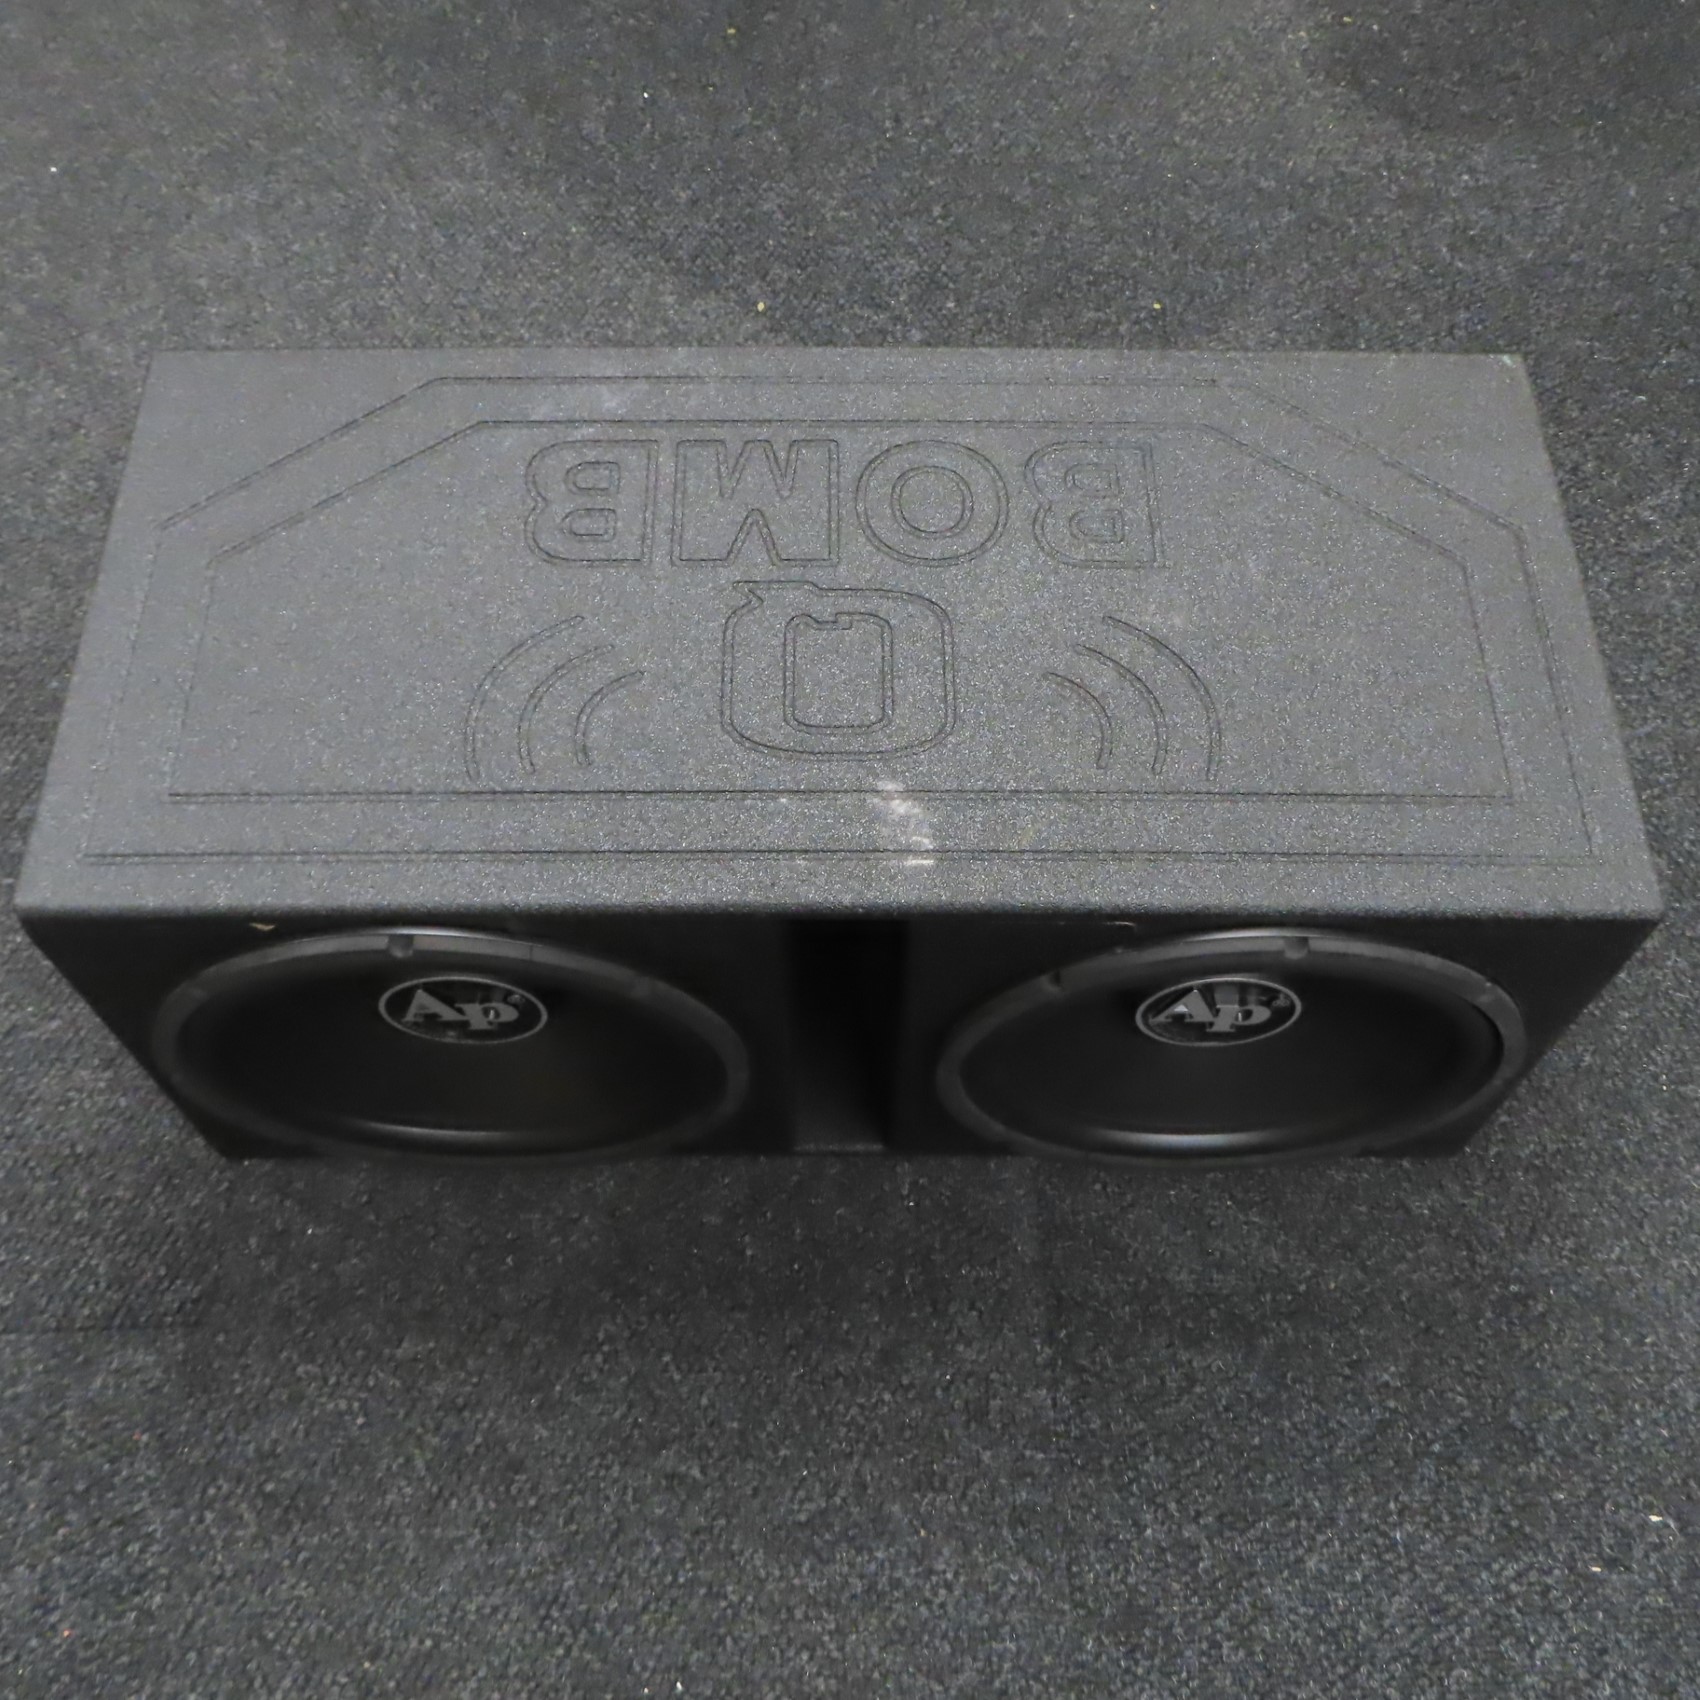 JBL GX1200 GX Series 250W RMS 12 Car Audio Subwoofer (Local Pick-Up Only)